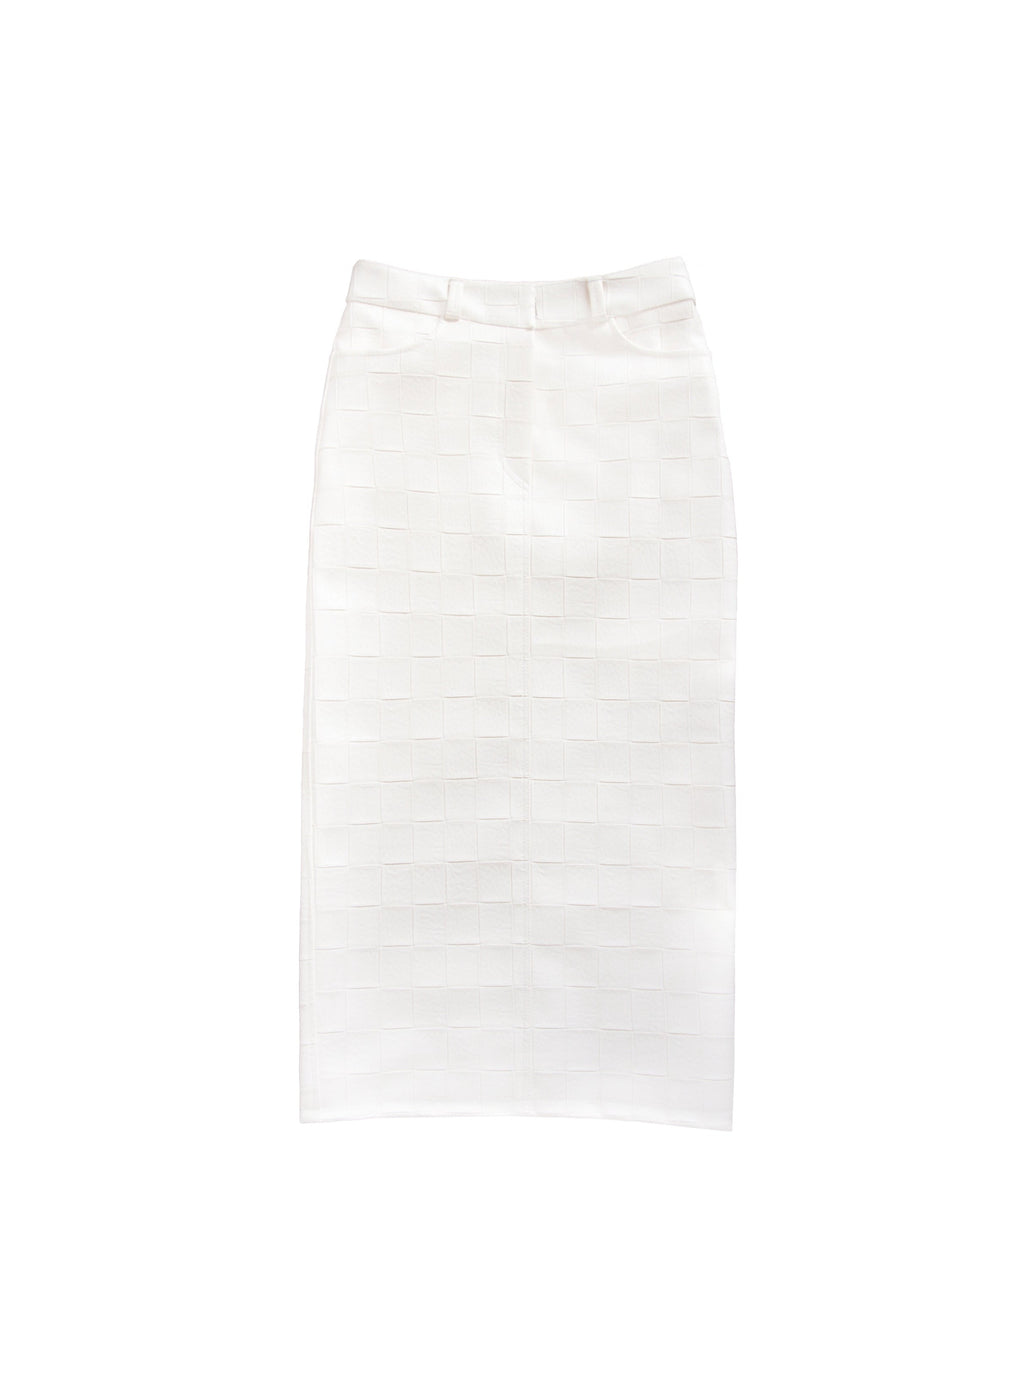 White check embossed leather pencil skirt.